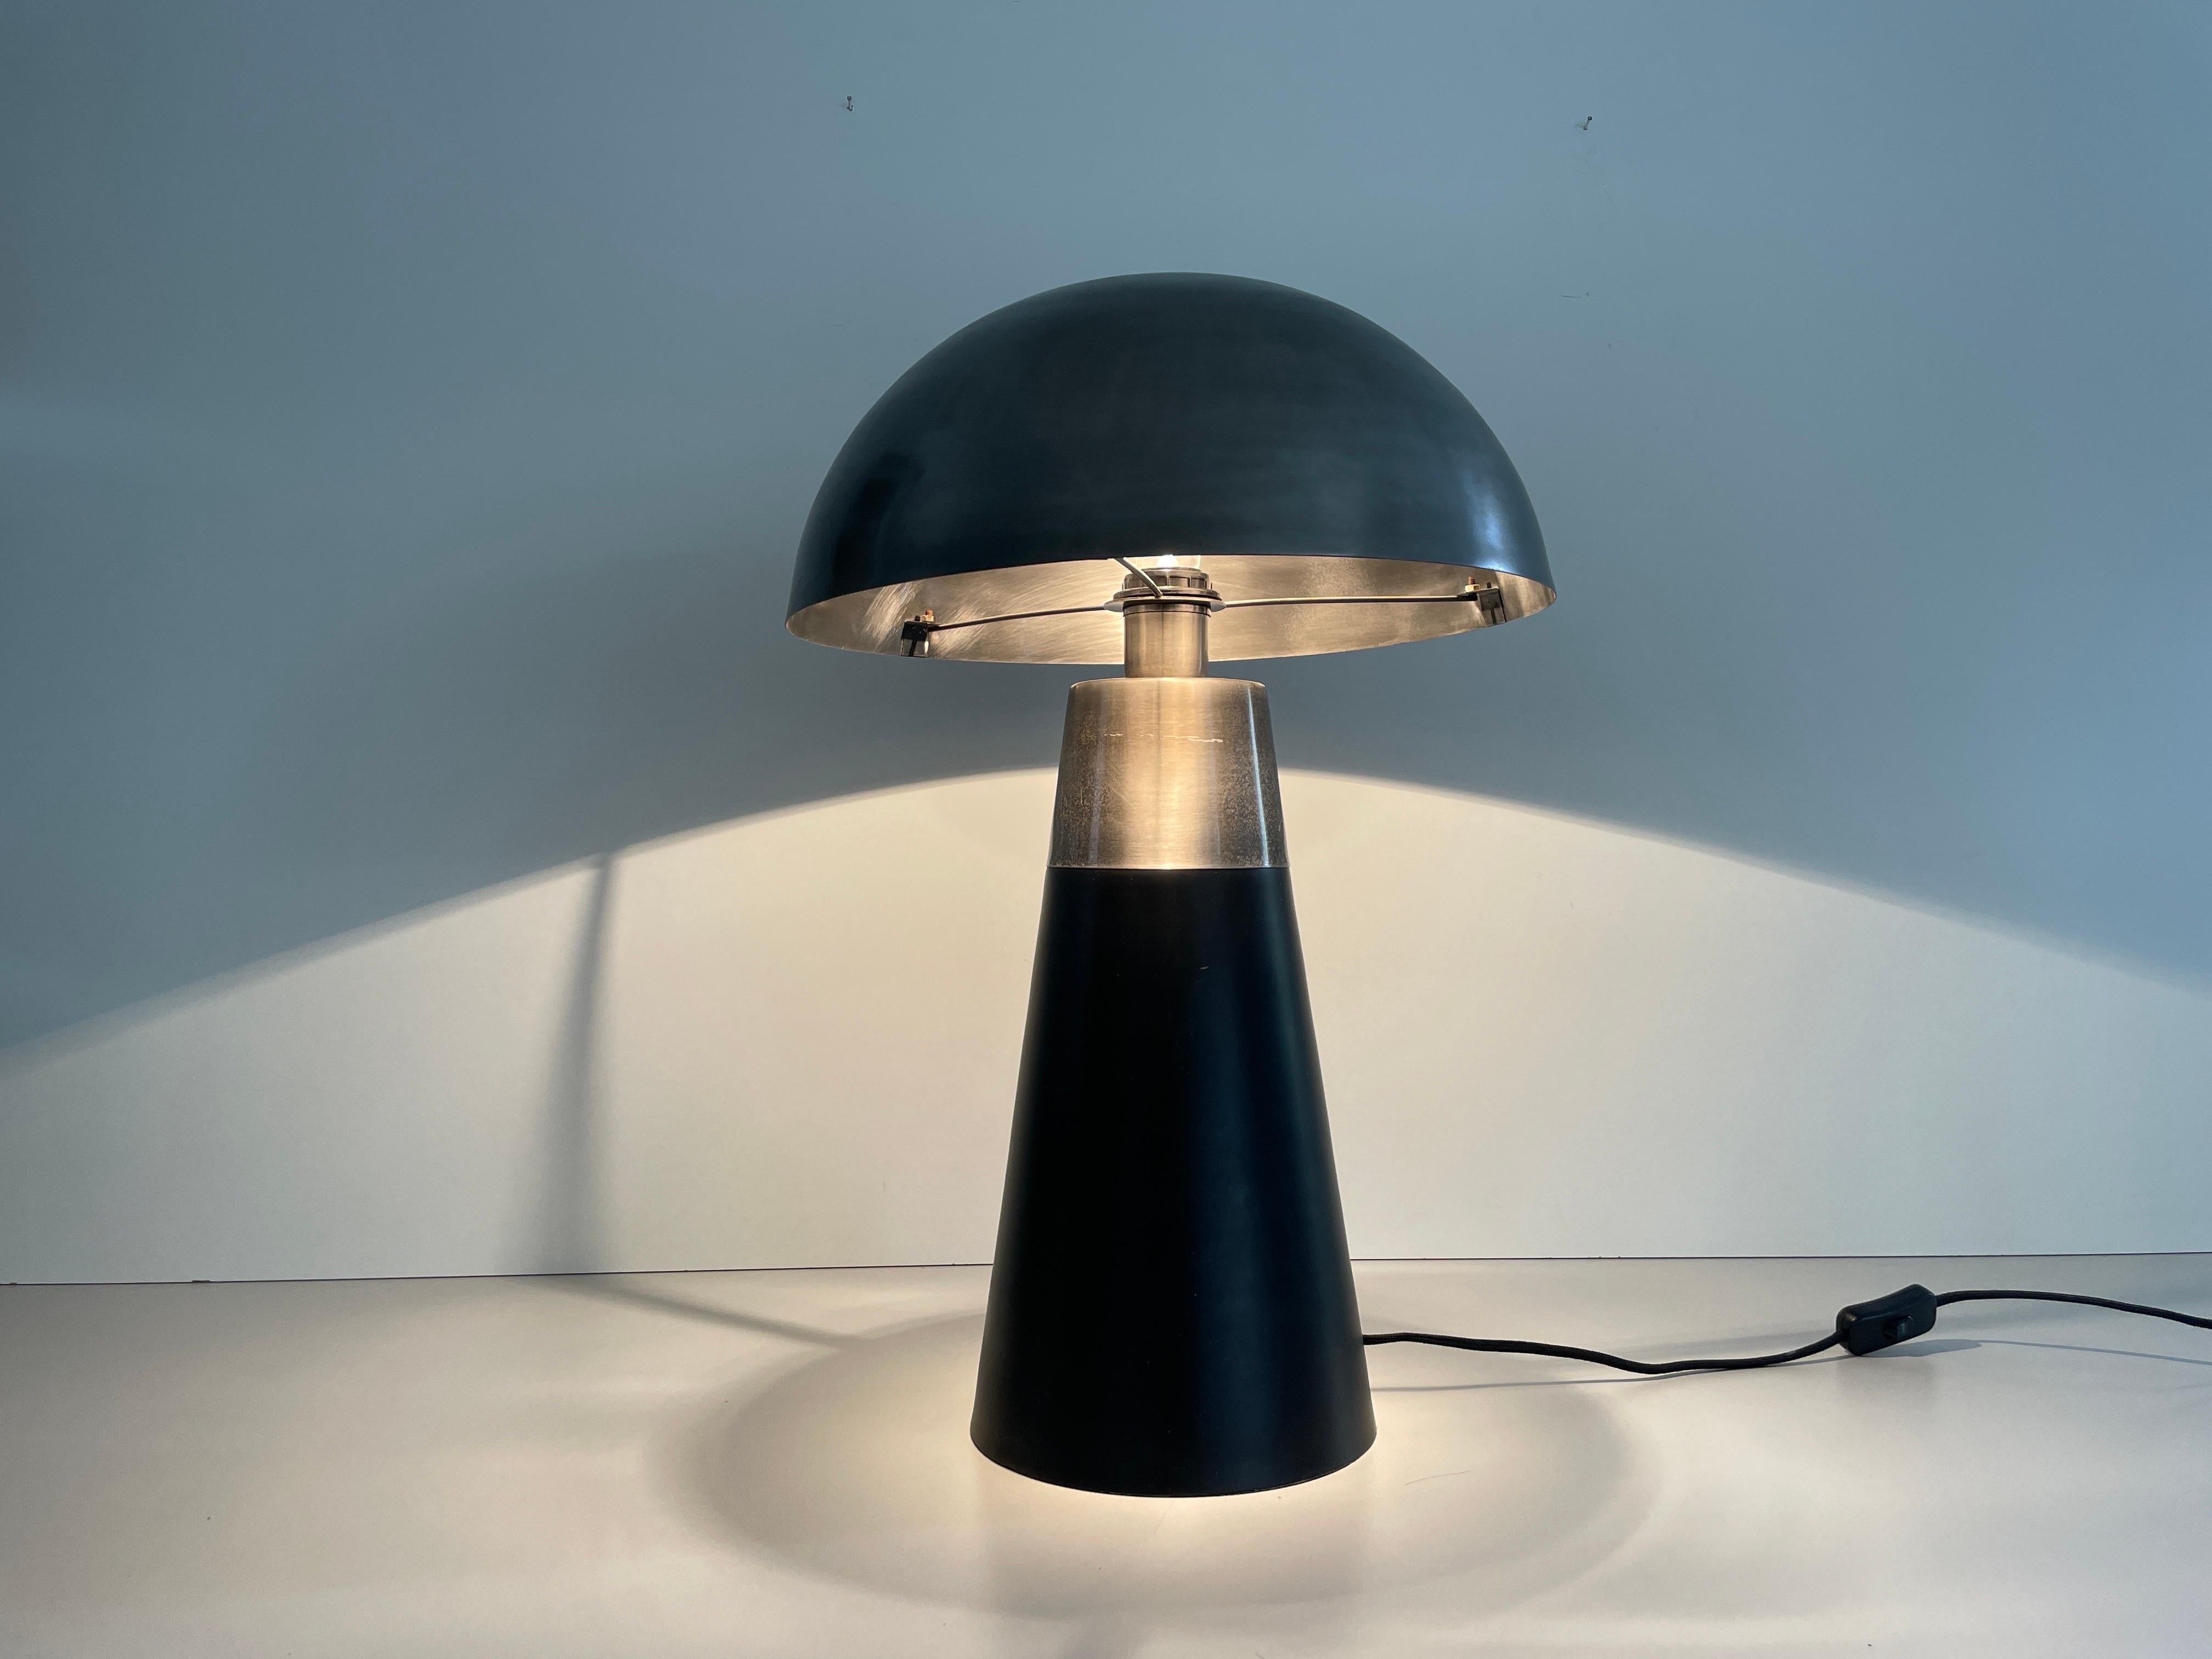 Muschroom and Conic Design Large Table Lamp by LAMBERT, 1980s, Germany For Sale 2